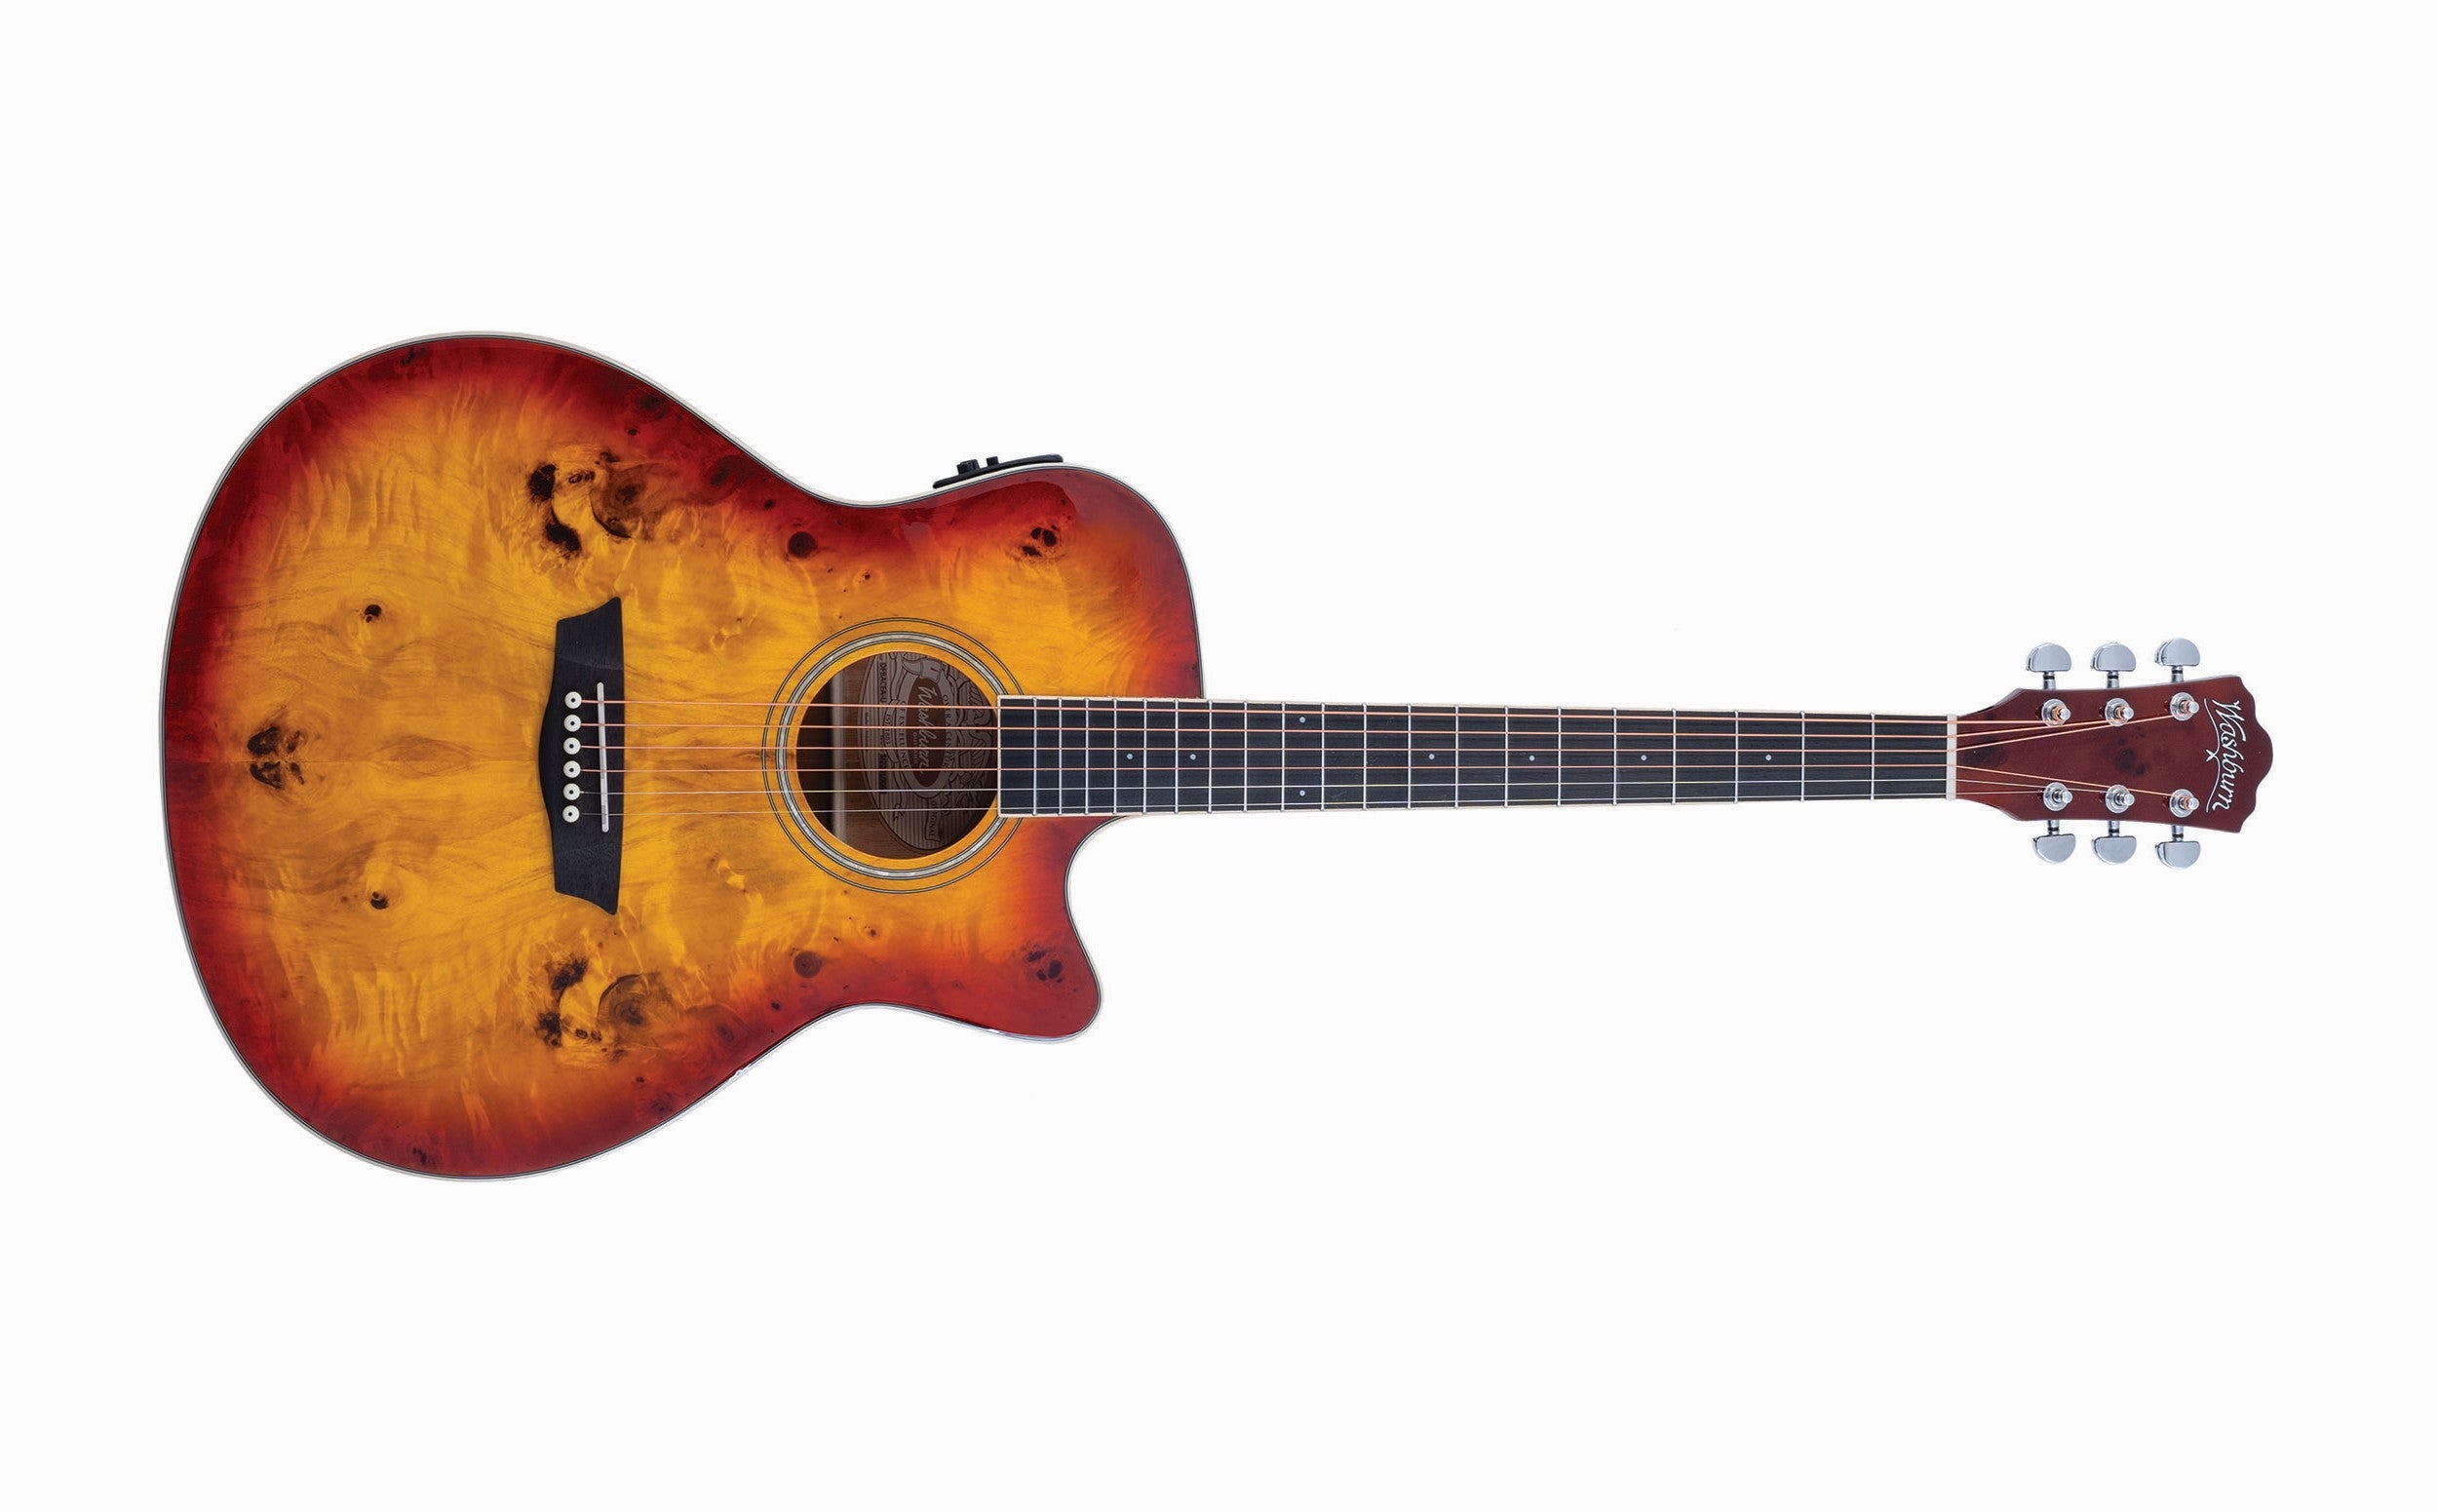 Washburn Deep Forest Burl Grand Auditorium Acoustic-Electric Guitar, Amber Fade DFBACEA